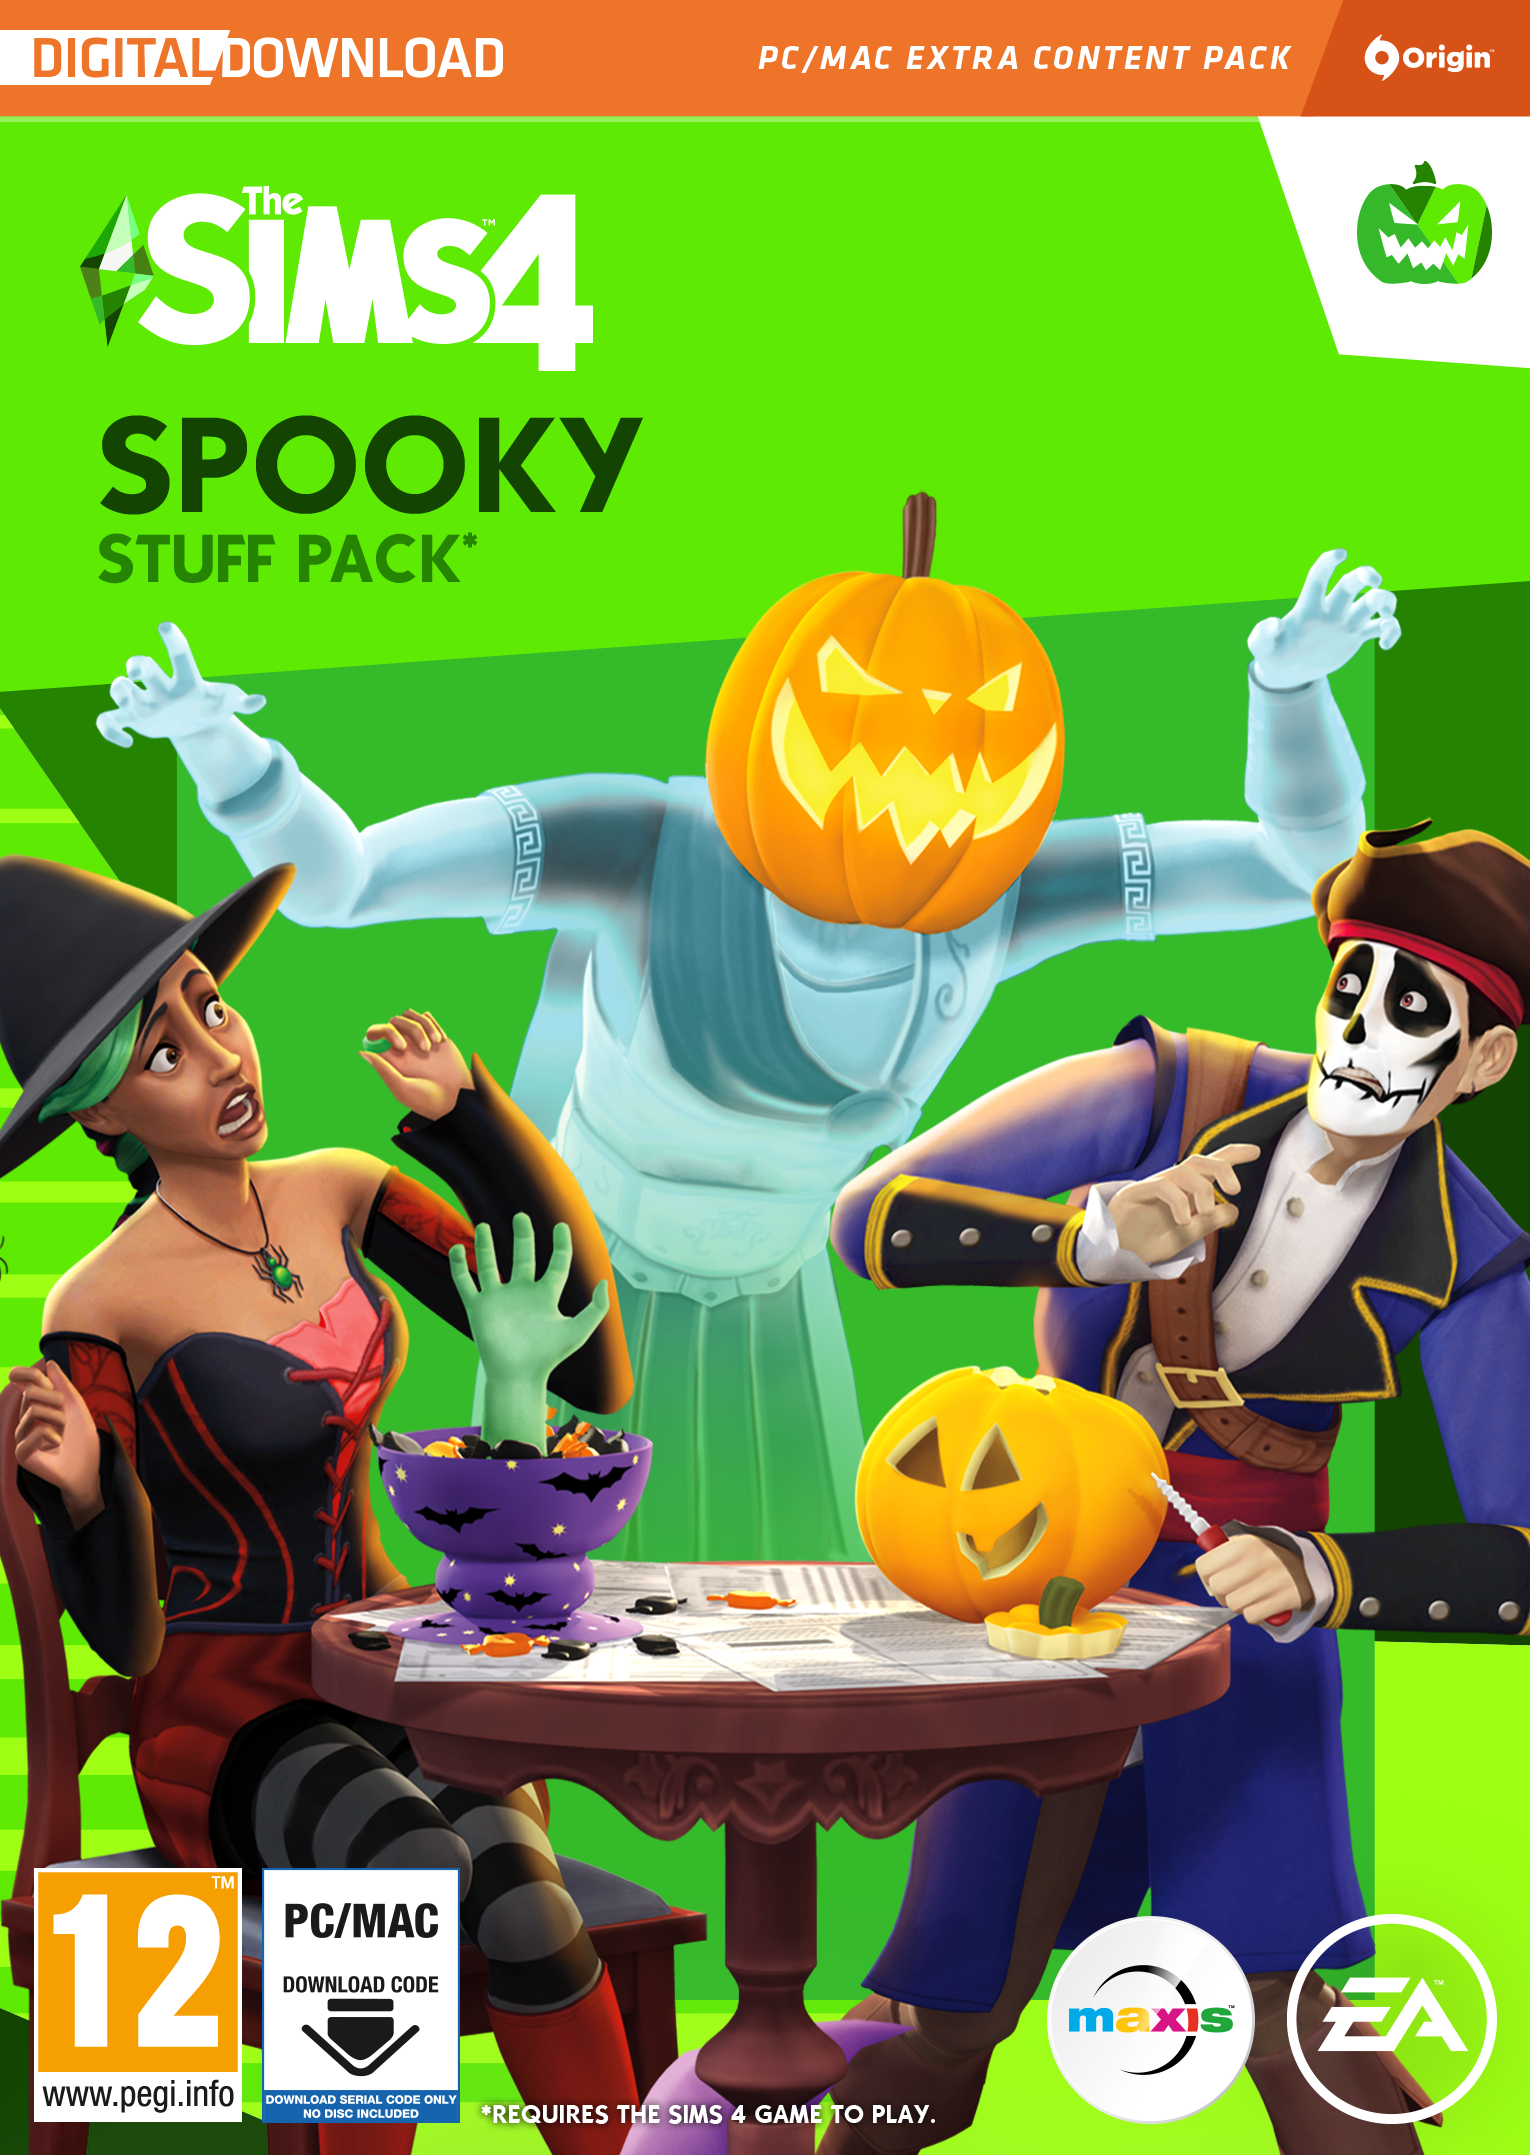 THE SIMS 4 (SP4) SPOOKY STUFF PACK